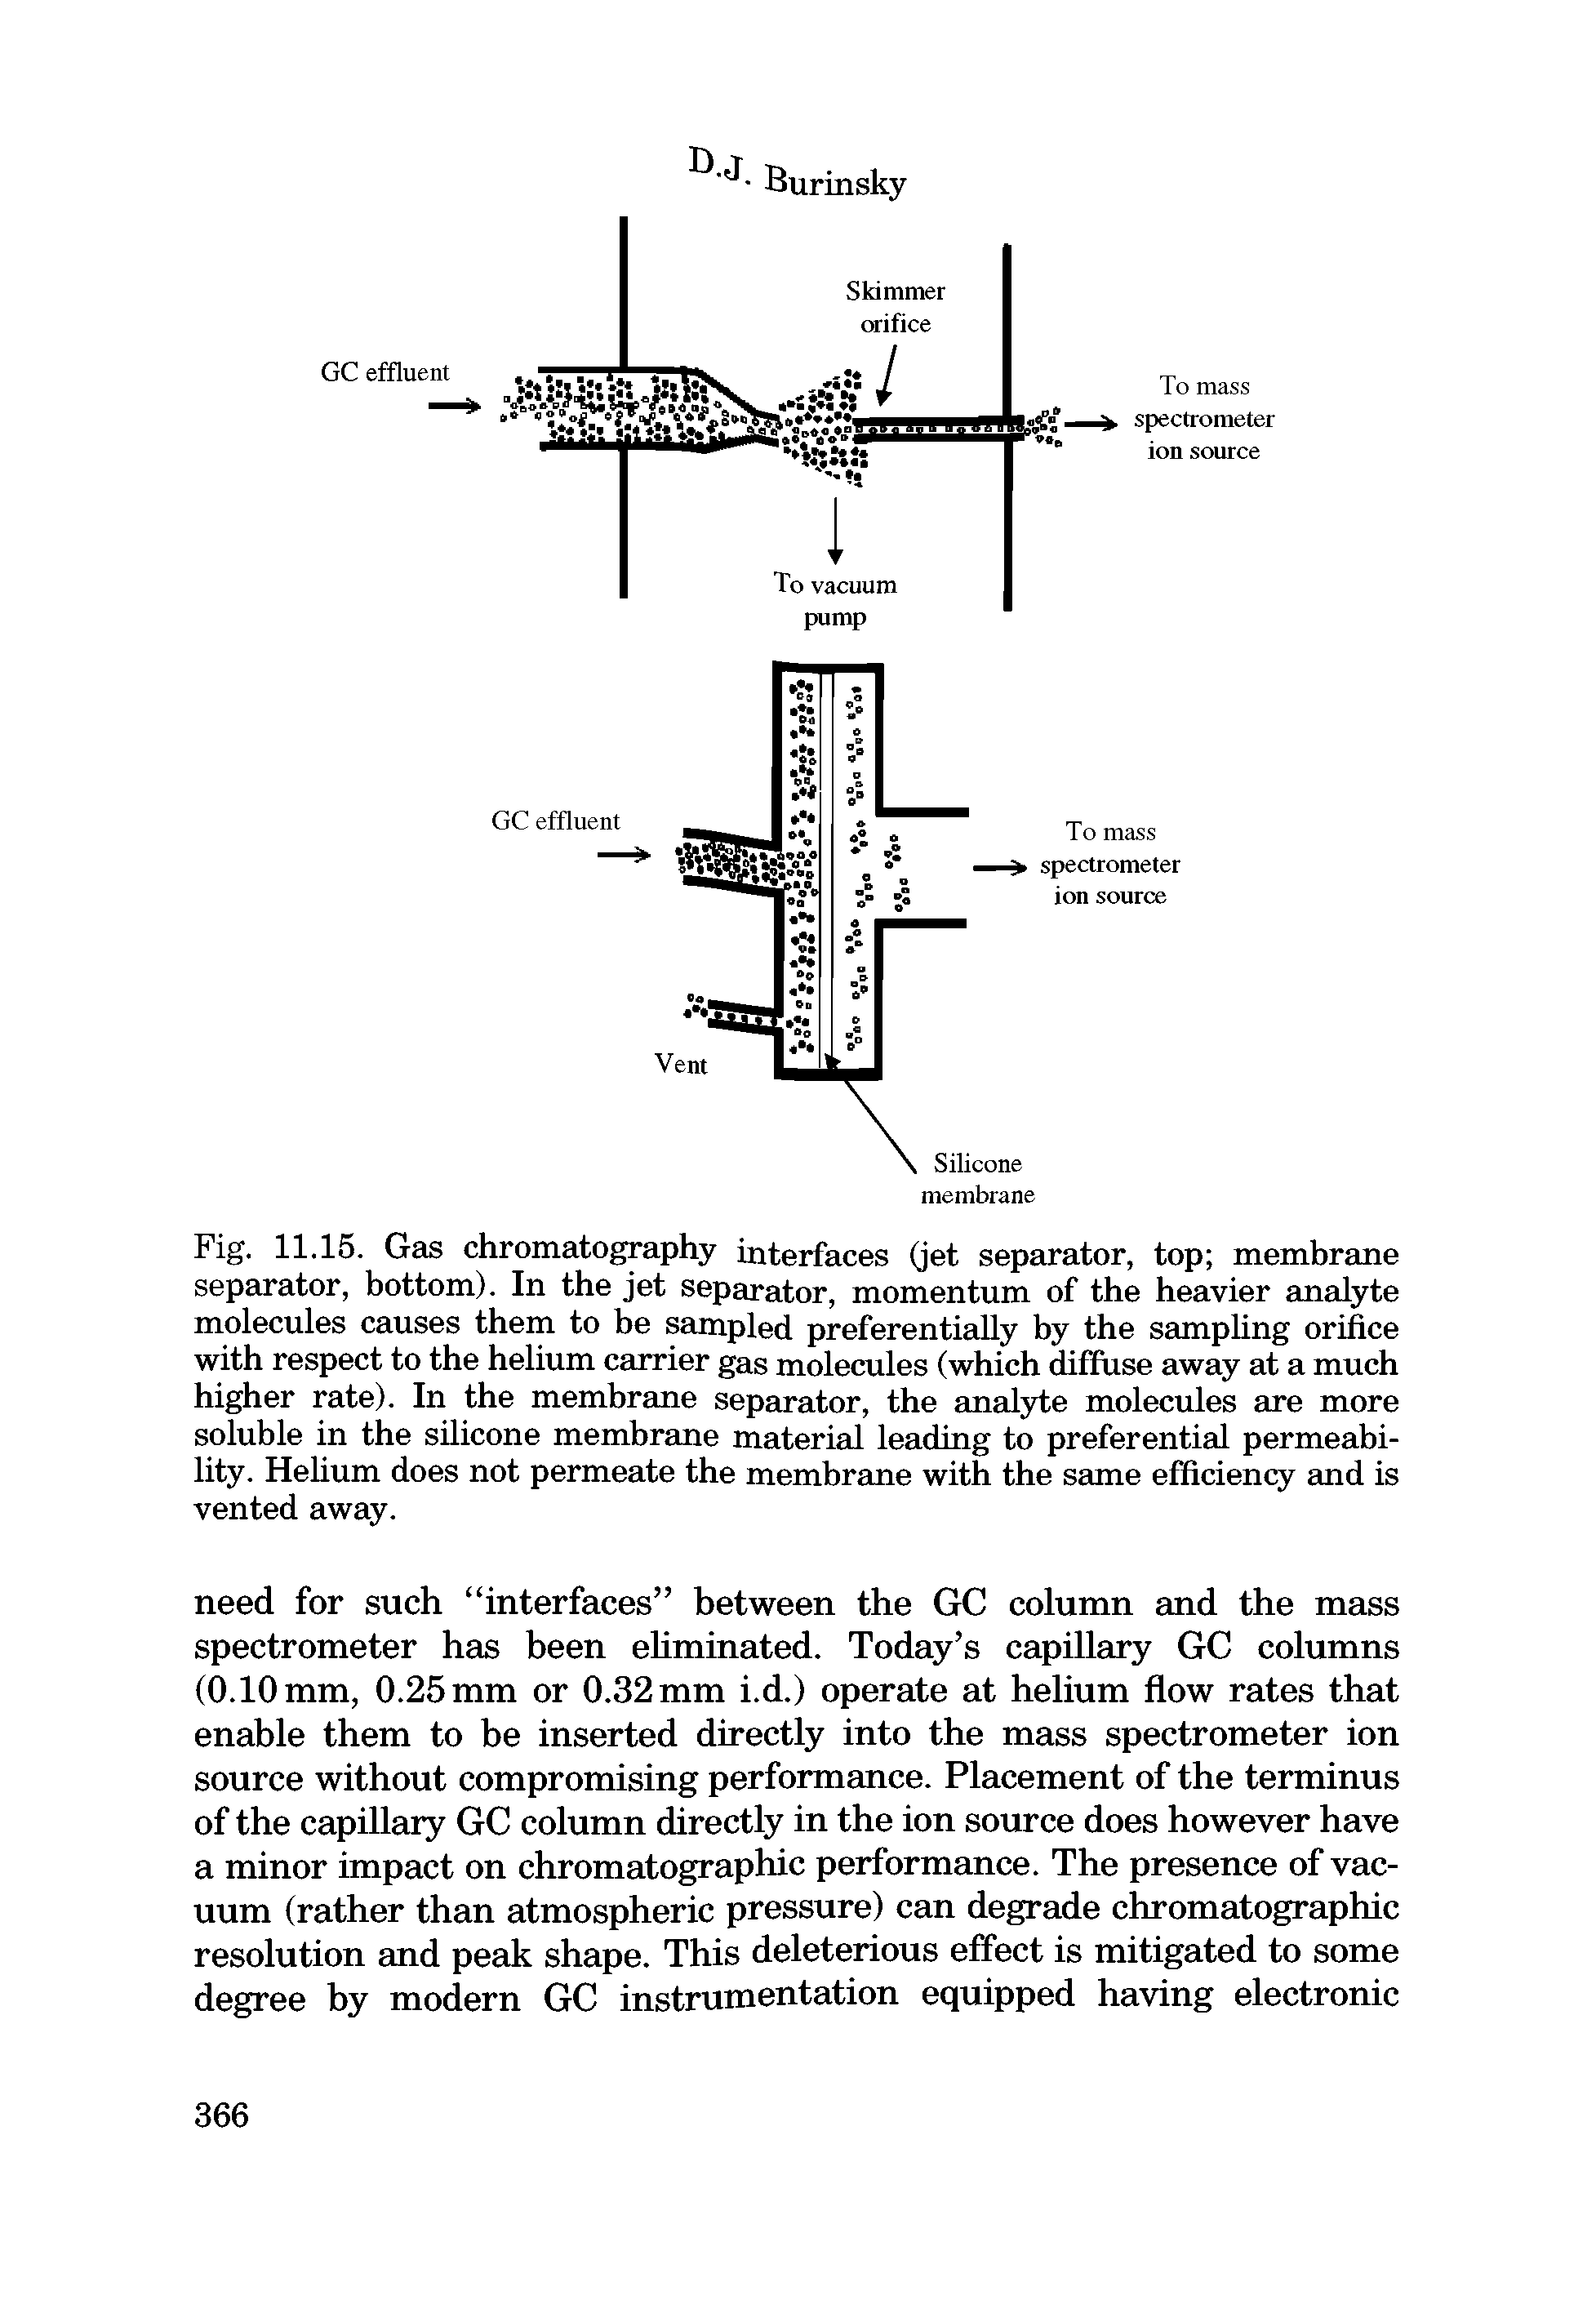 Fig. 11.15. Gas chromatography interfaces (jet separator, top membrane separator, bottom). In the jet separator, momentum of the heavier analyte molecules causes them to be sampled preferentially by the sampling orifice with respect to the helium carrier gas molecules (which diffuse away at a much higher rate). In the membrane separator, the analyte molecules are more soluble in the silicone membrane material leading to preferential permeability. Helium does not permeate the membrane with the same efficiency and is vented away.